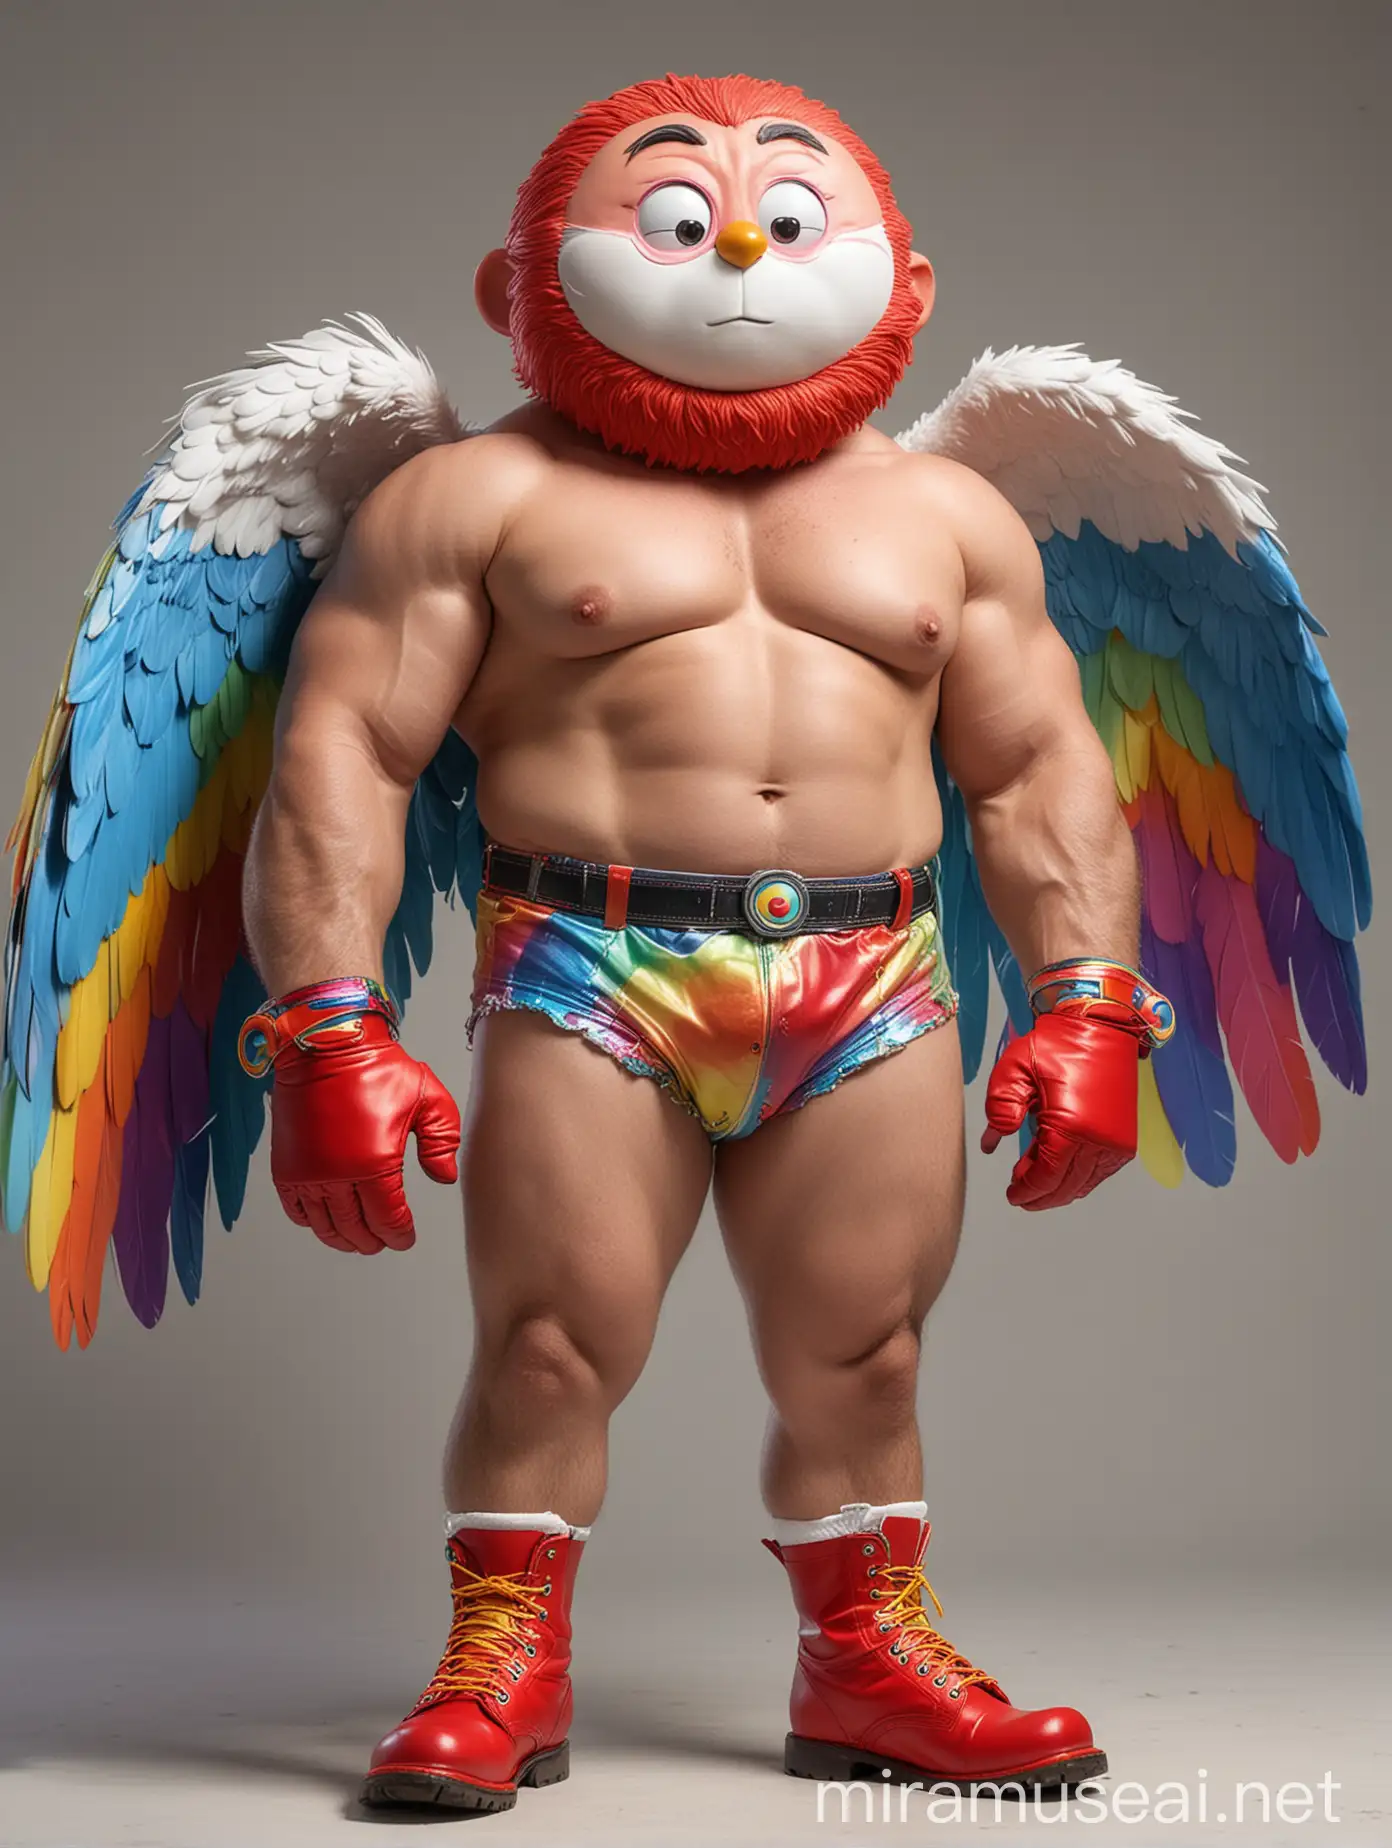 Beefy Red Head Bodybuilder Flexing in Rainbow Eagle Wings Jacket and Doraemon Goggles